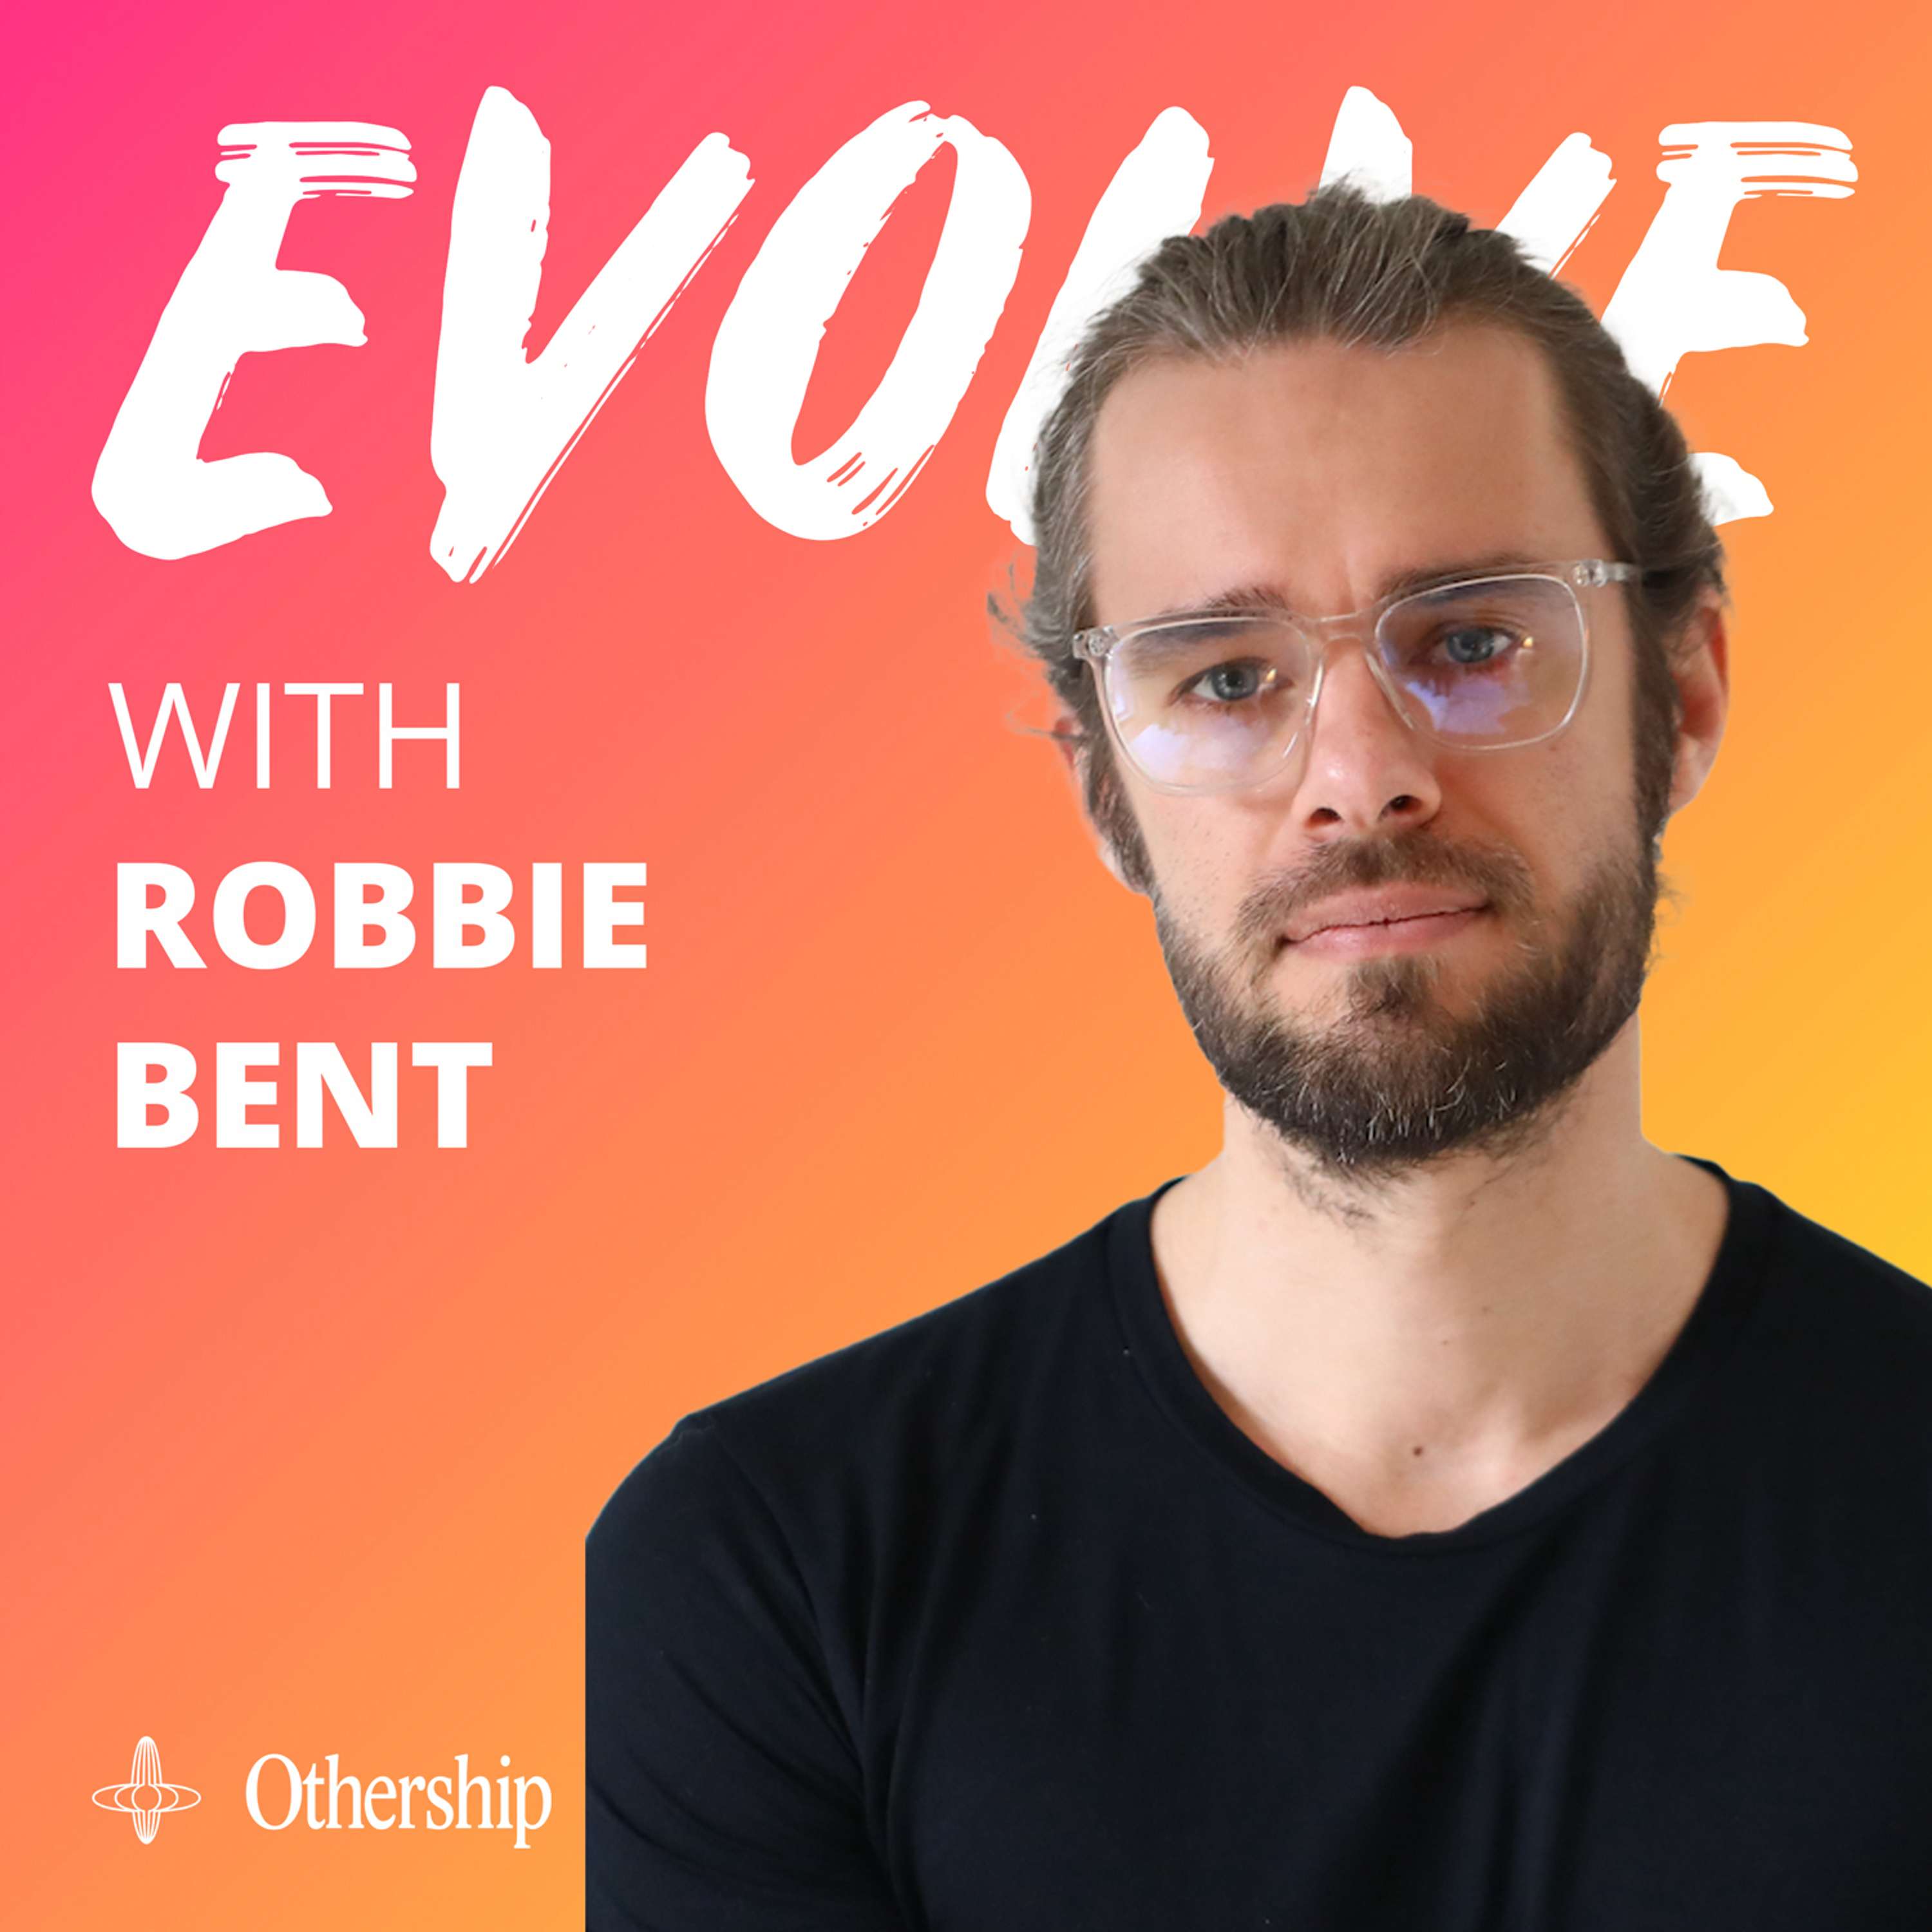 Robbie Bent on Breathwork for Mental Health, 8 Day Cave Retreats, and Overcoming Failure and Addiction  | Evolve 076